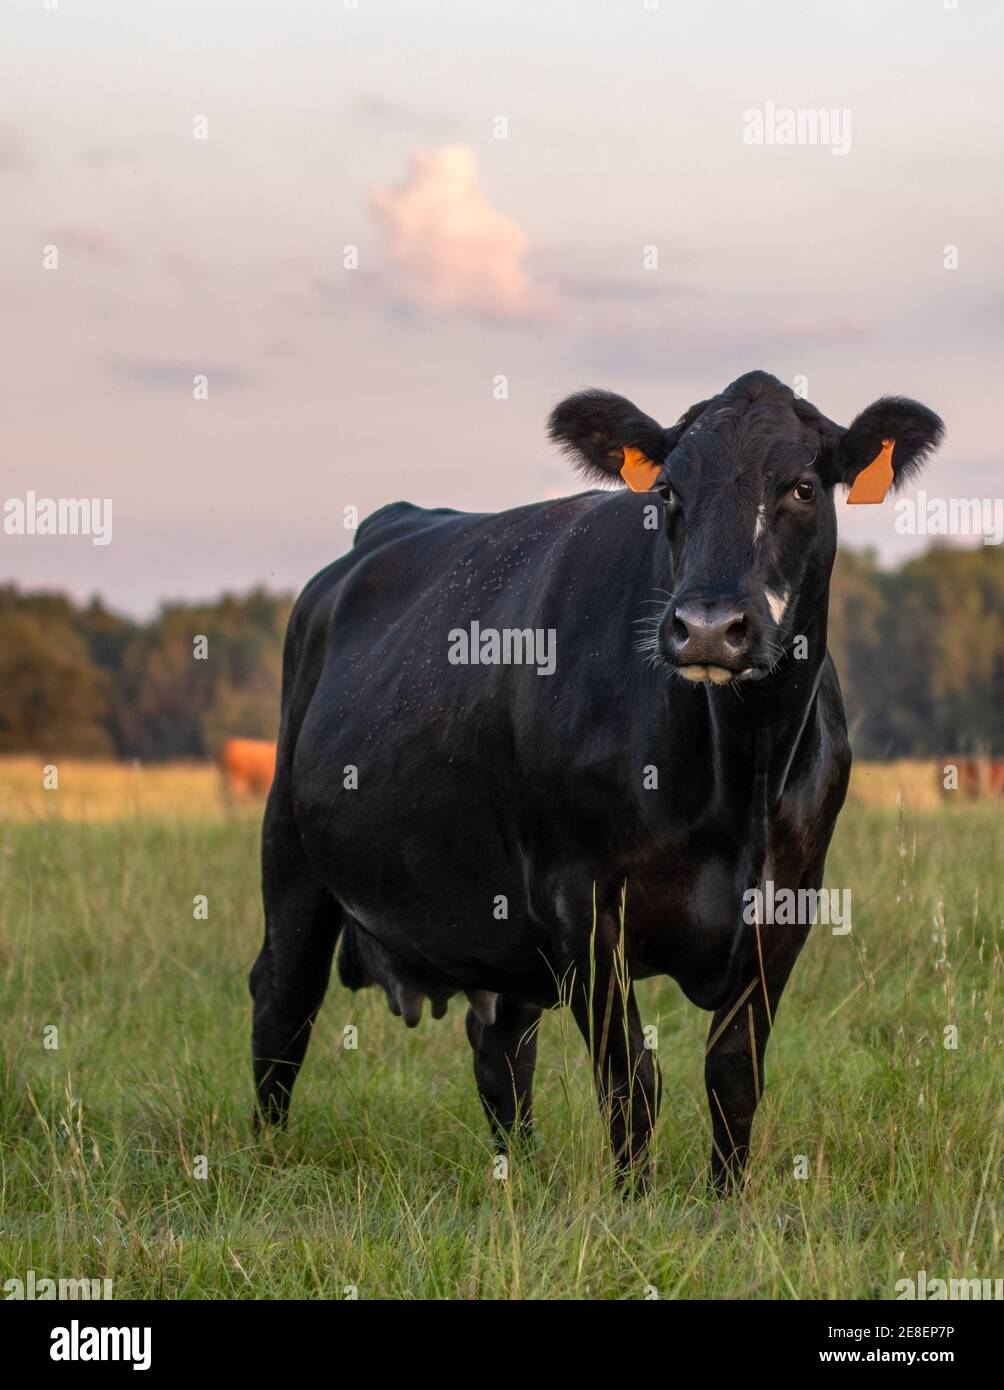 One black Angus crossbred cow at dusk in portrait with other cows out of focus in the background. Stock Photo